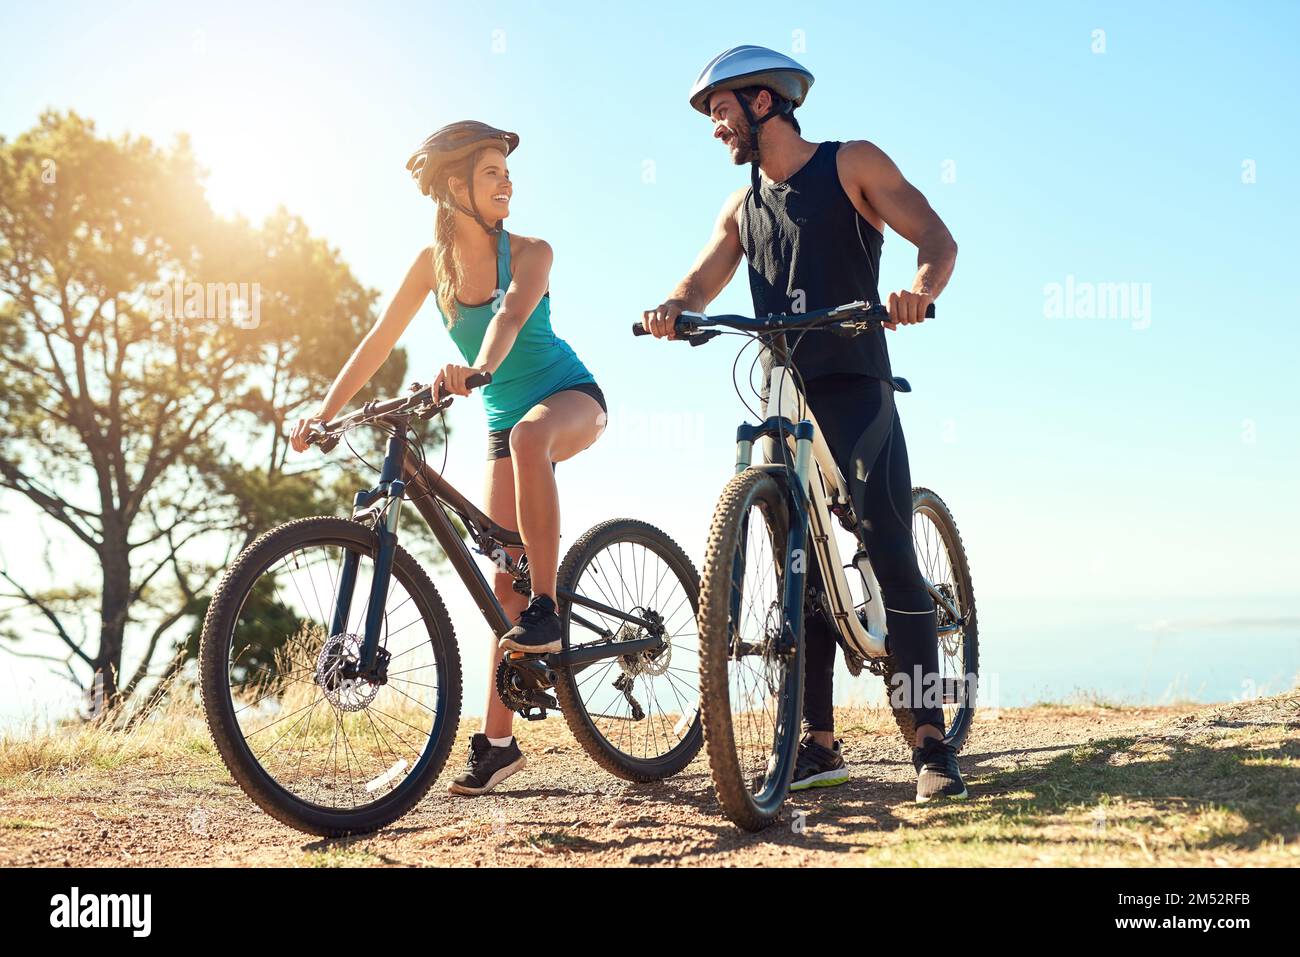 The main goal should always be to have fun. a happy young couple out mountain biking together. Stock Photo